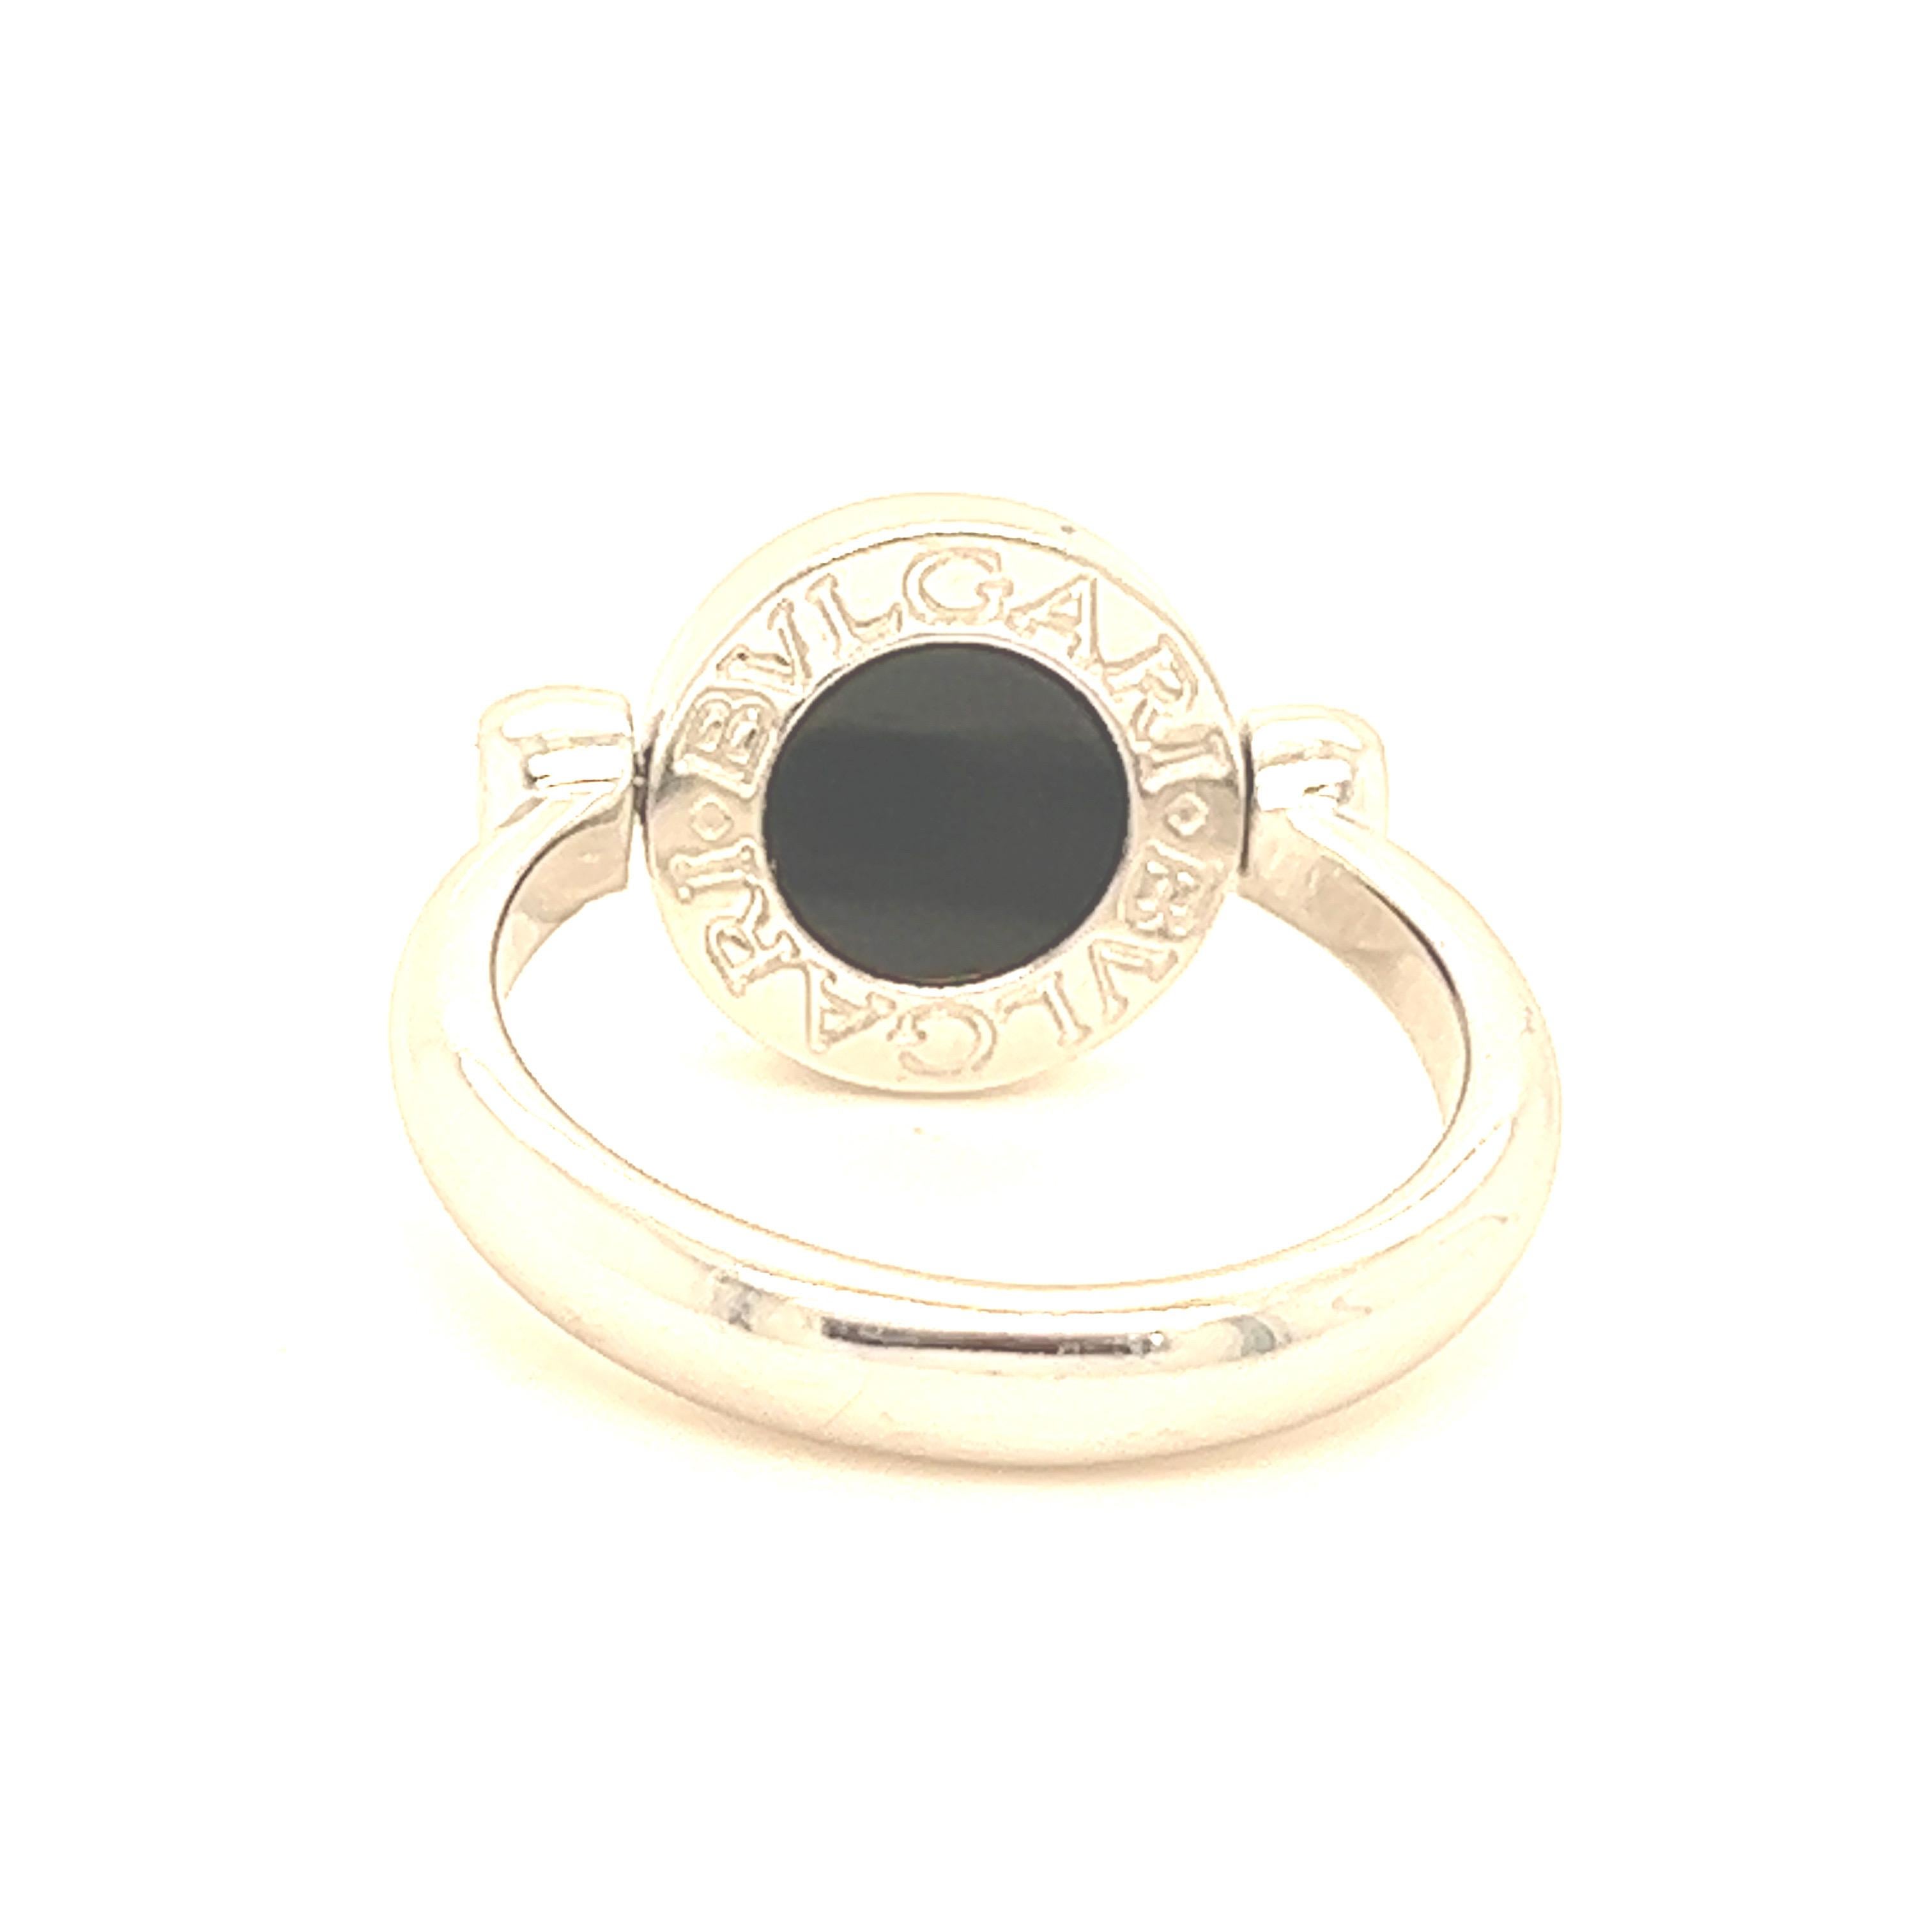 Bvlgari Bvlgari flip ring set with Onyx and Diamond 

This Bvlgari Bvlgari fun flip double sided ring was originally inspired by the edges of the Romain coin, whilst today a fun multi-wear ring, this piece can be flipped to either wear it as a